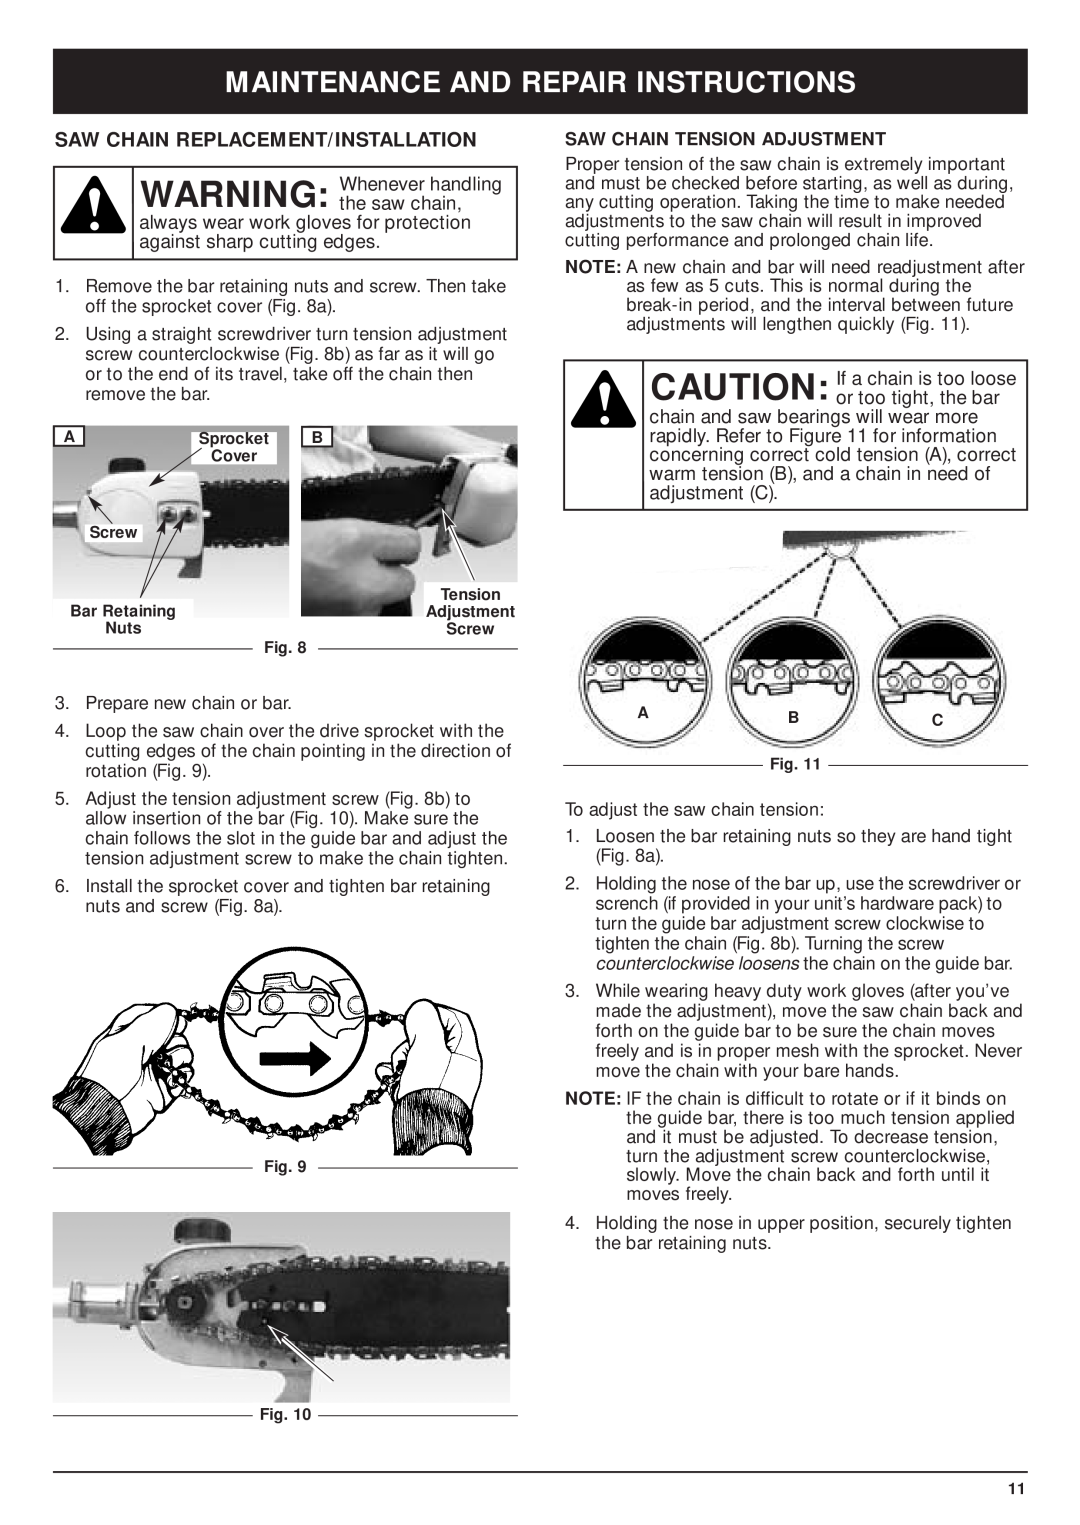 MTD TBPS Maintenance And Repair Instructions, Saw Chain Replacement/Installation, WARNING Whenever handling the saw chain 